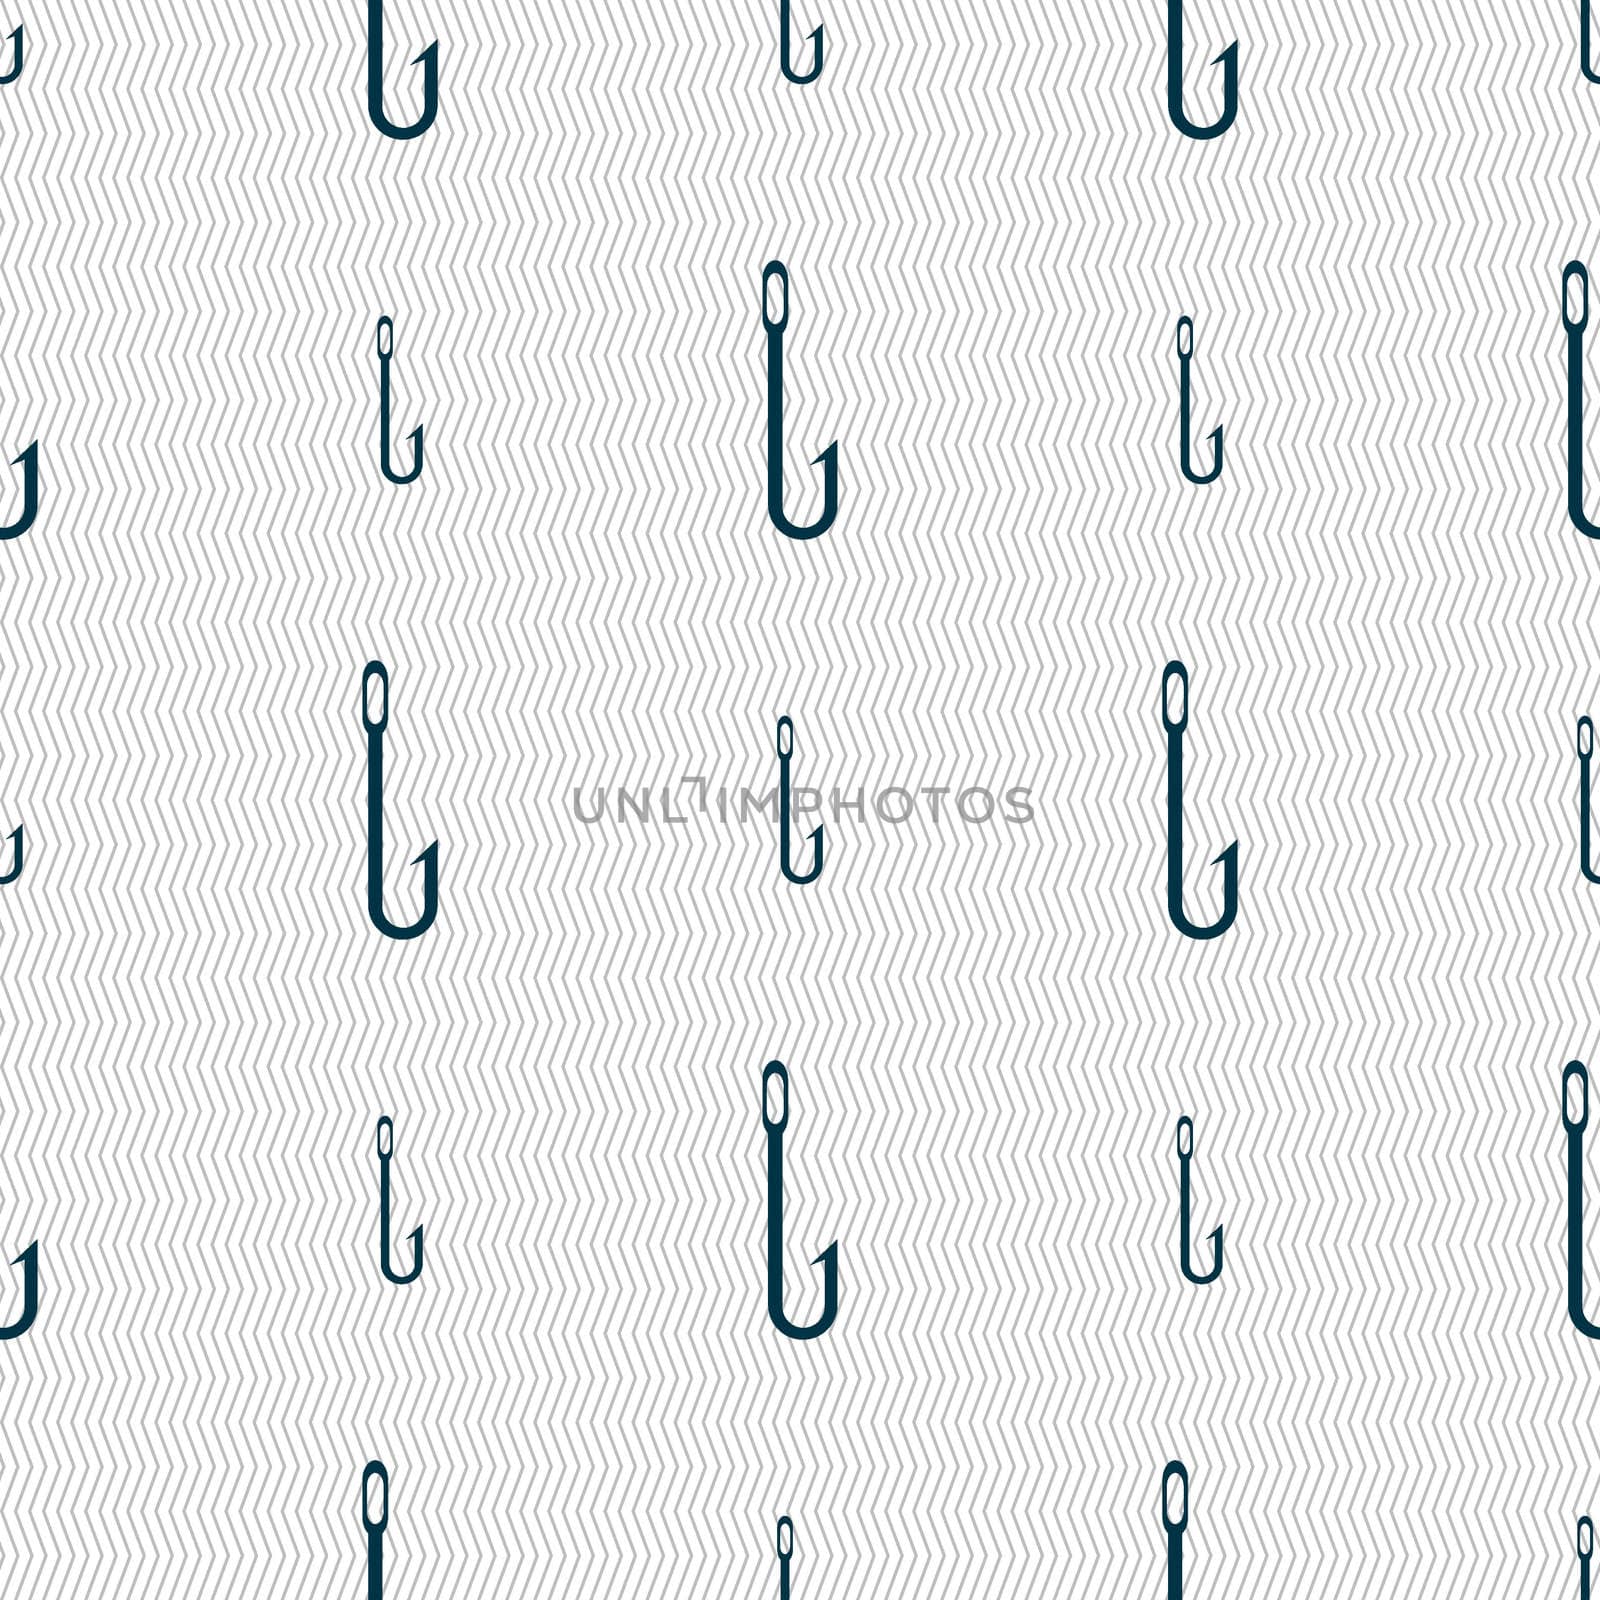 Fishing hook icon sign. Seamless abstract background with geometric shapes. illustration